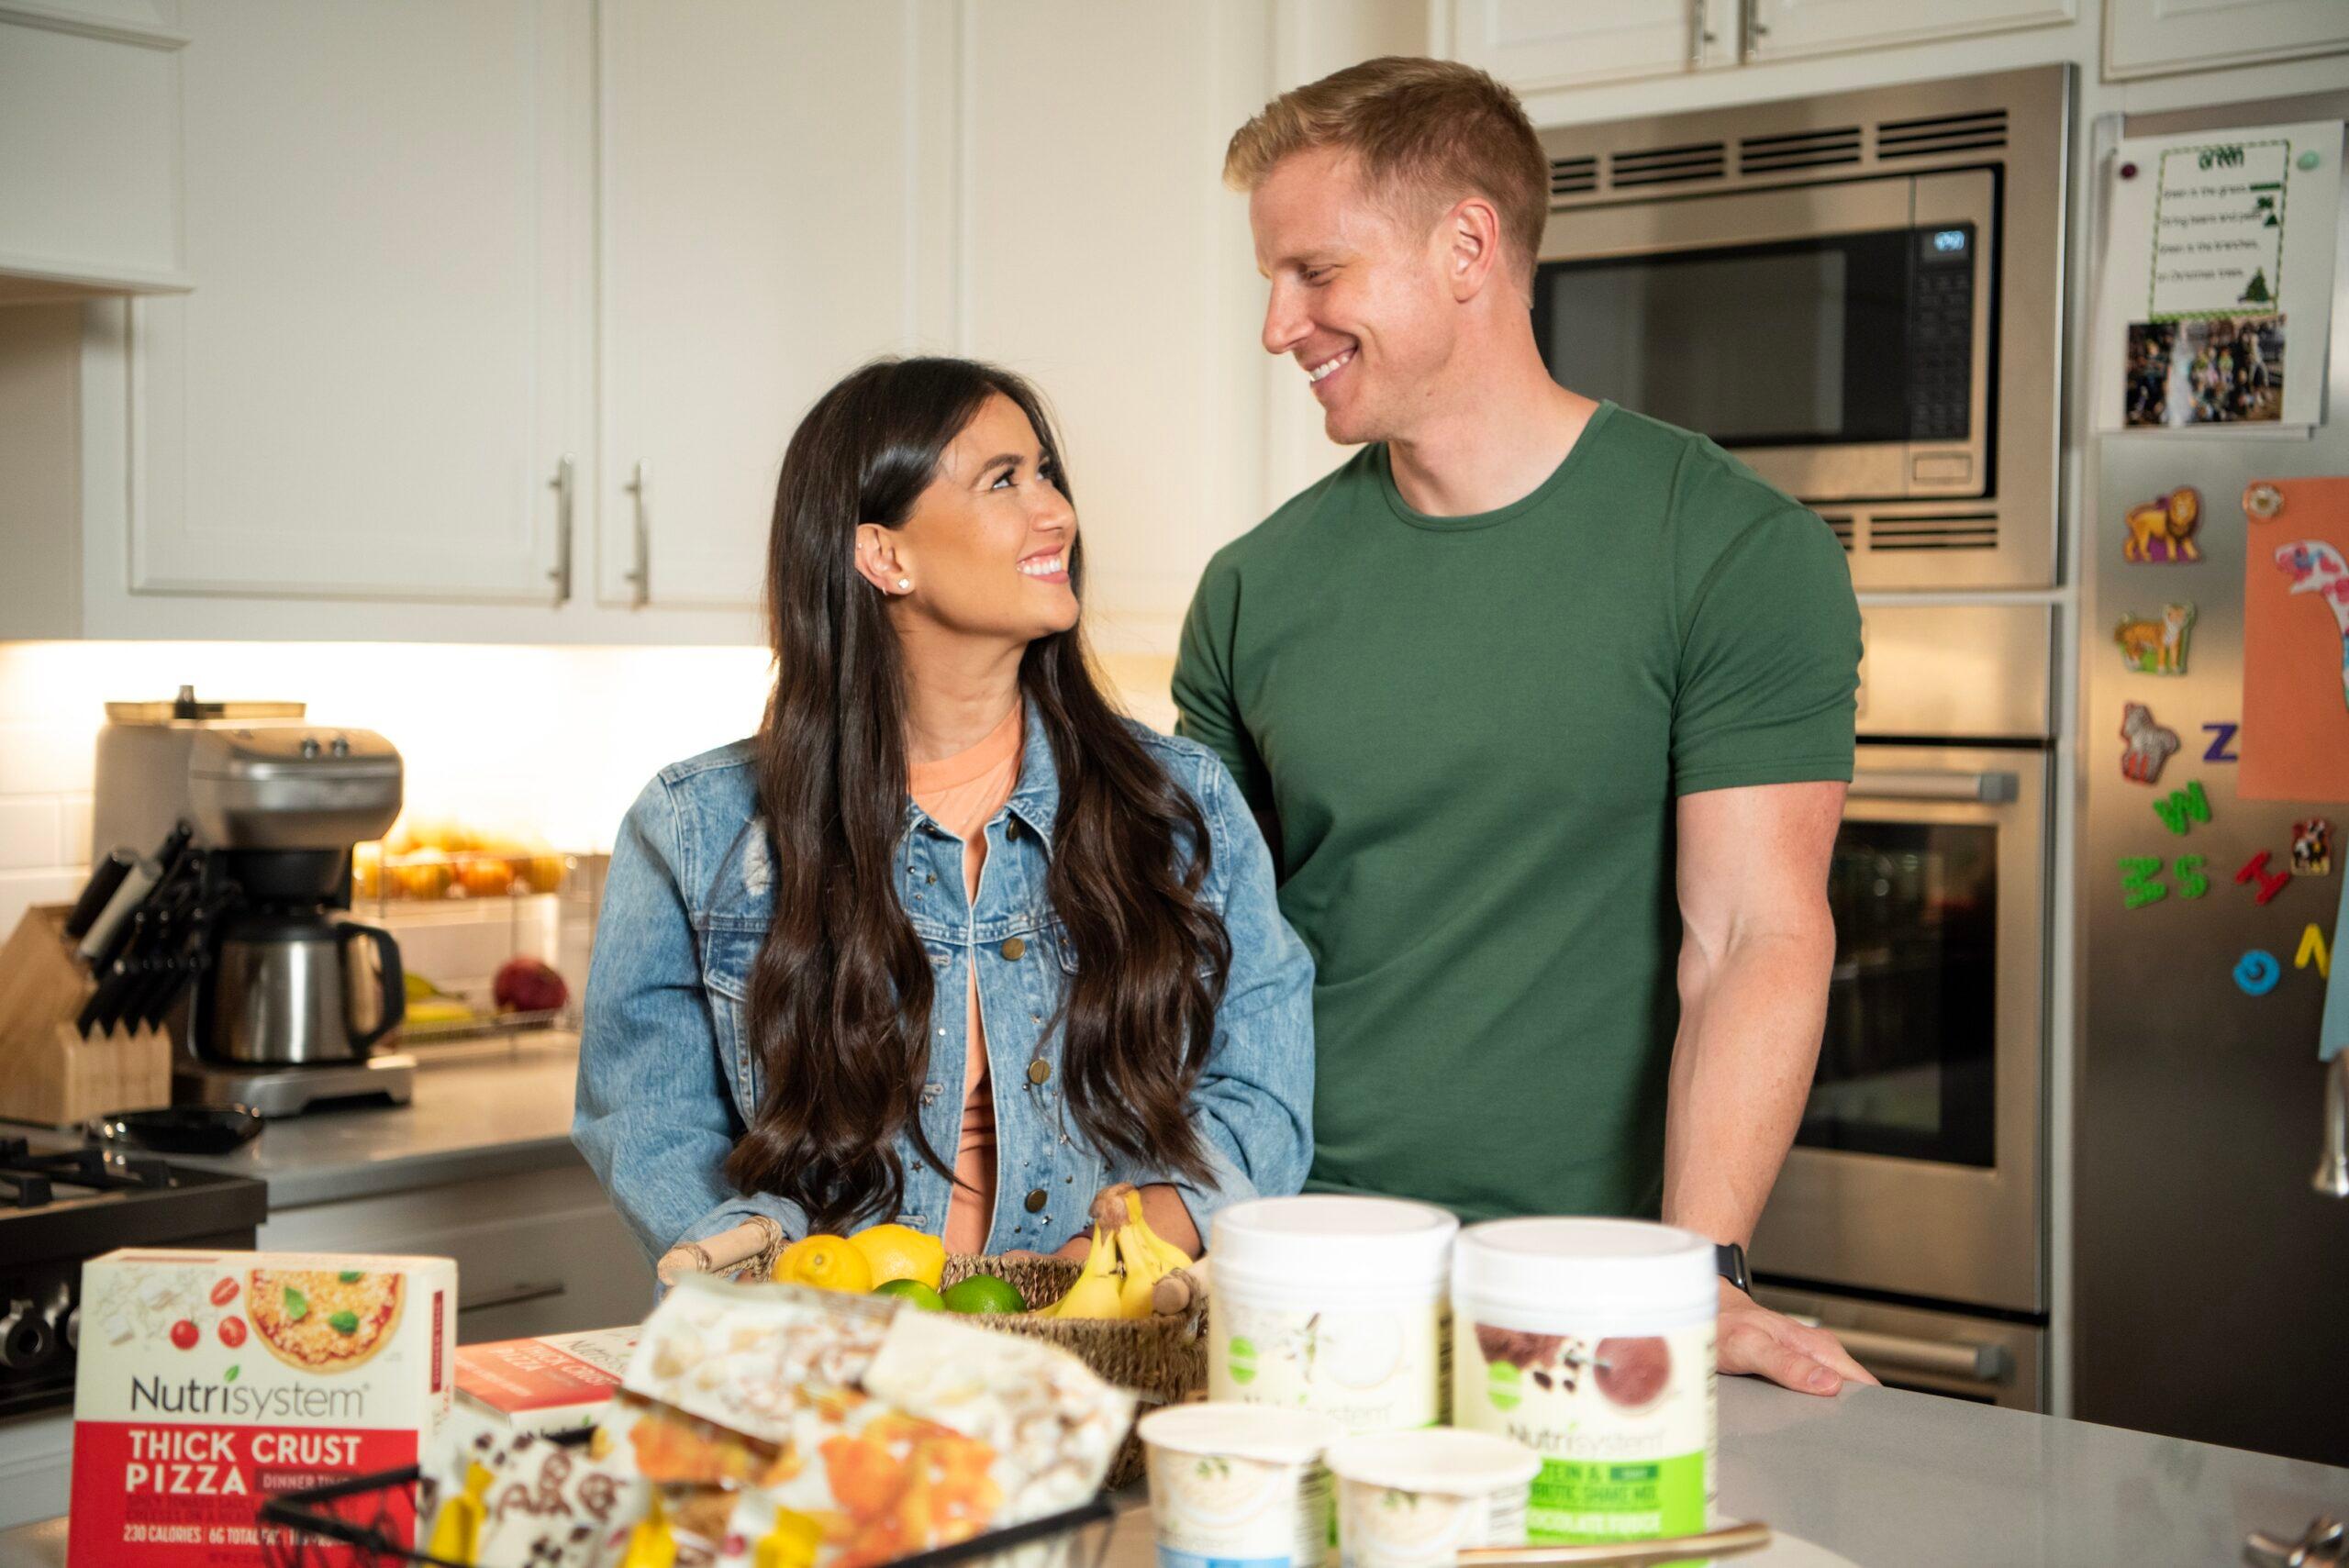 Bachelor stars Sean and Catherine Lowe reveal collective 37lbs weight loss on Nutrisystem couples plan